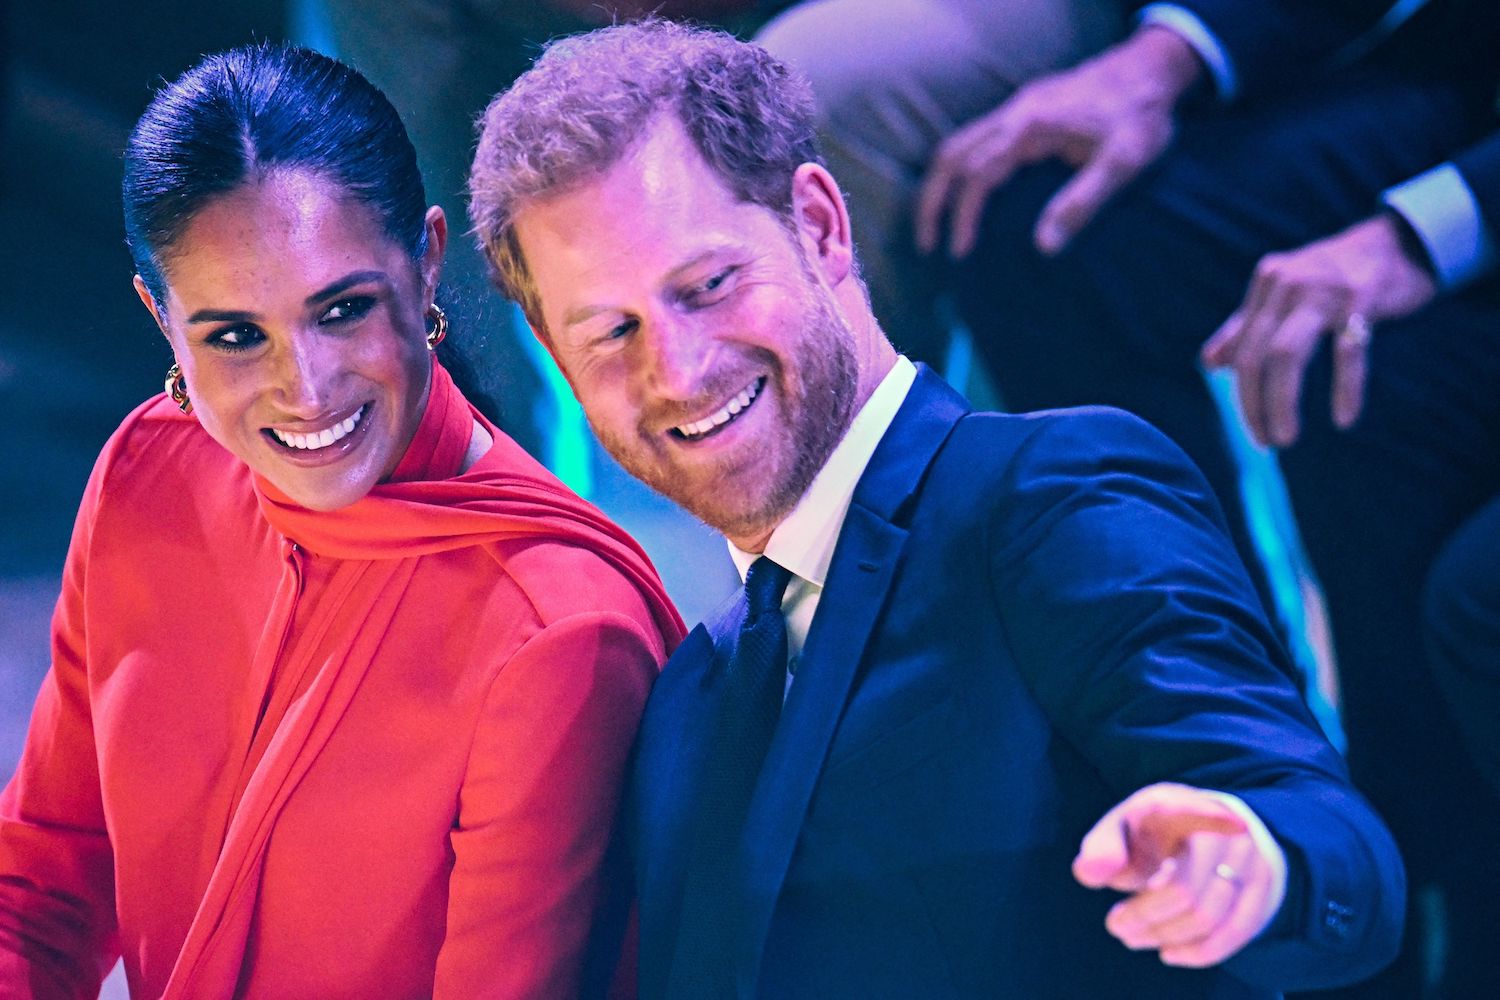 Meghan Markle body language as seen at One Young World summit where she wore a red outfit alongside Prince Harry in a suit